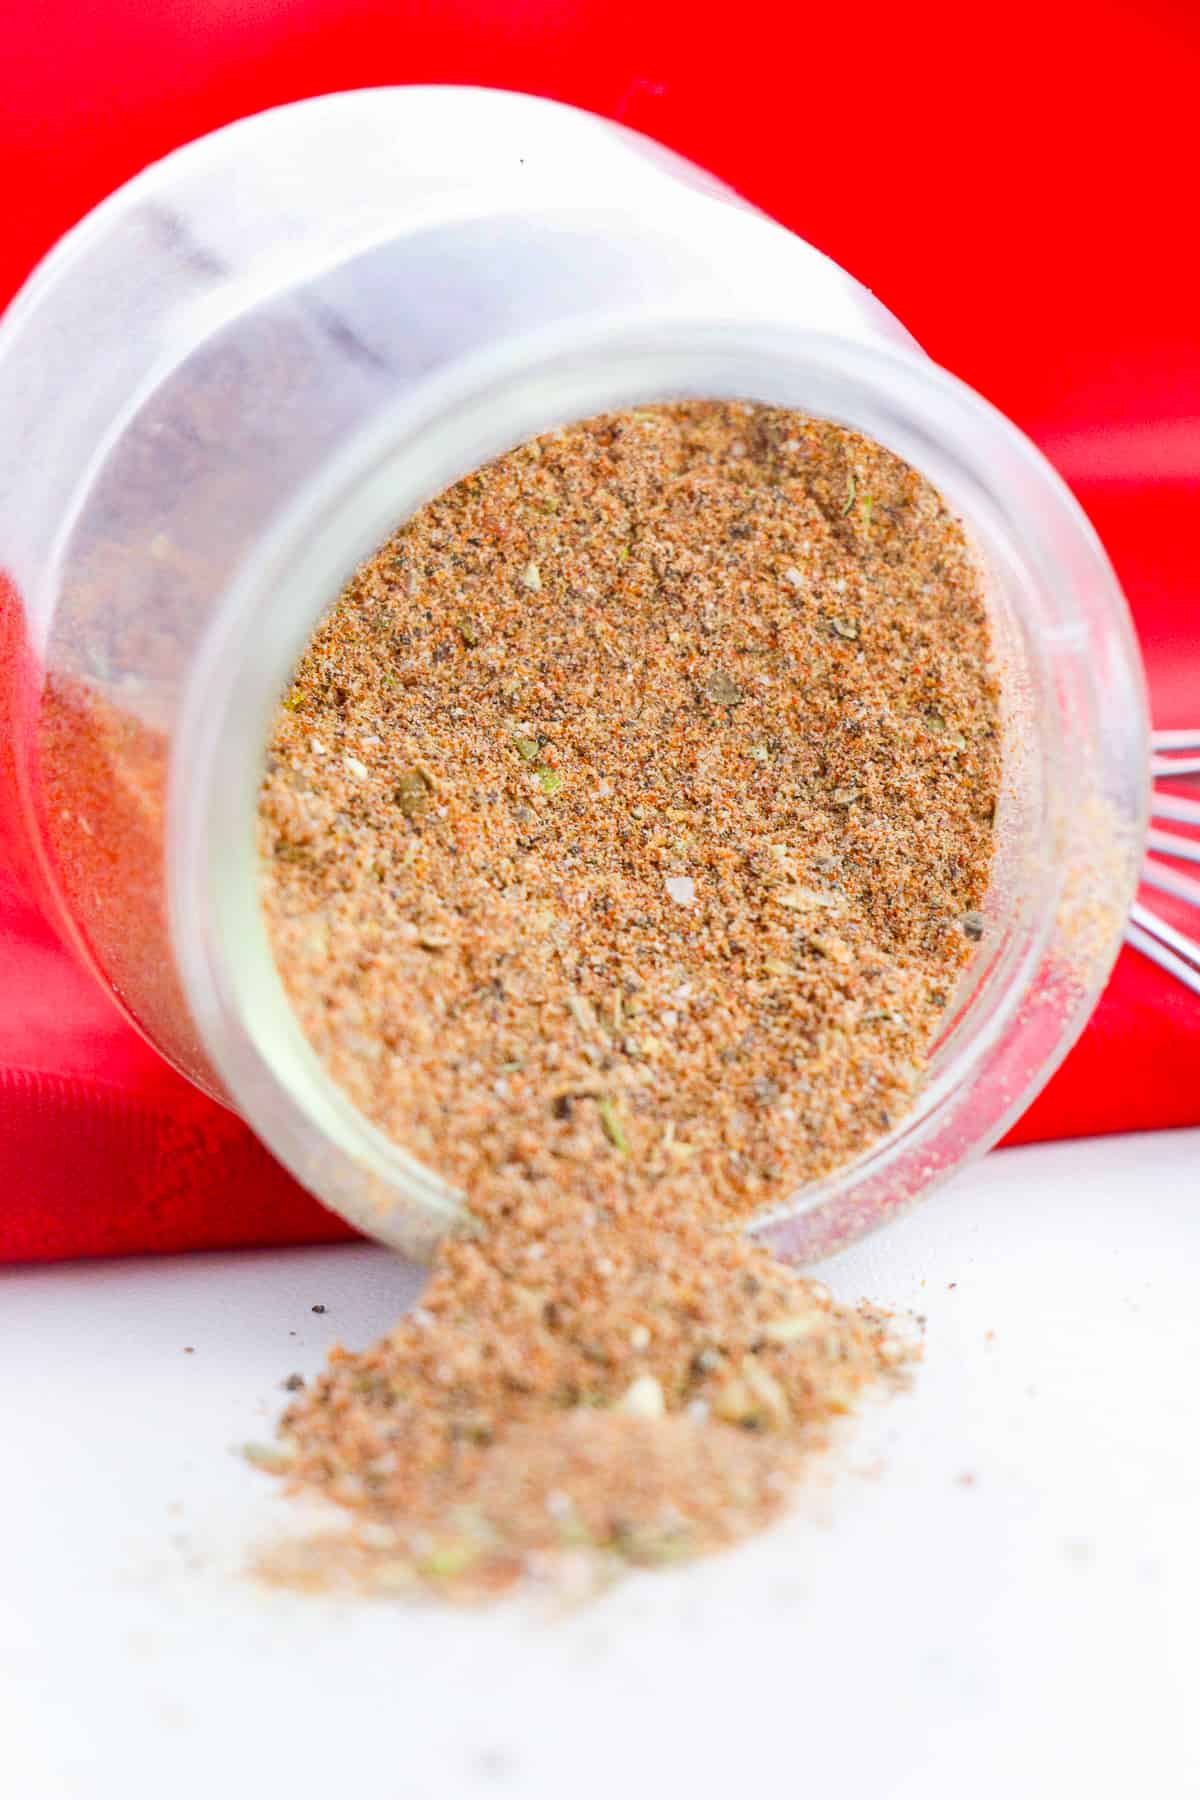 Jar of homemade chili seasoning mix laying down on its side with the seasoning falling out onto tabletop